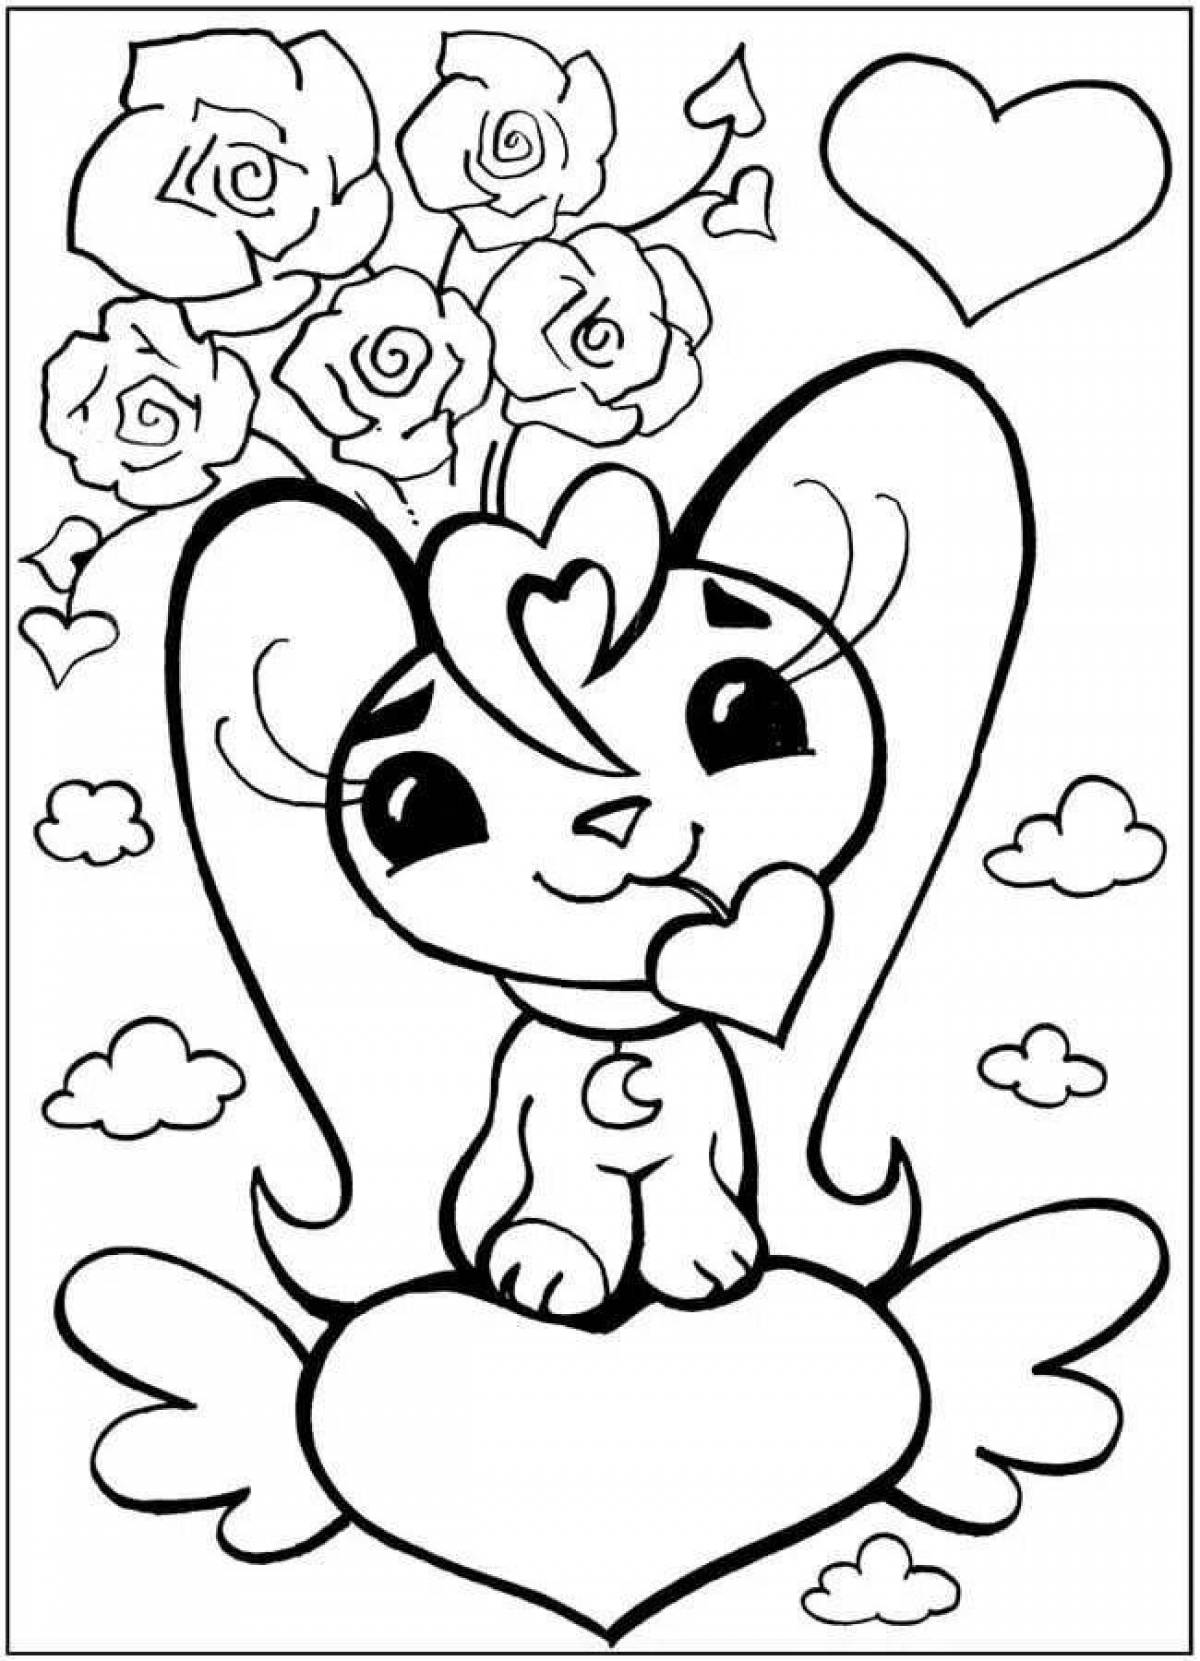 Happy valentine's day coloring page